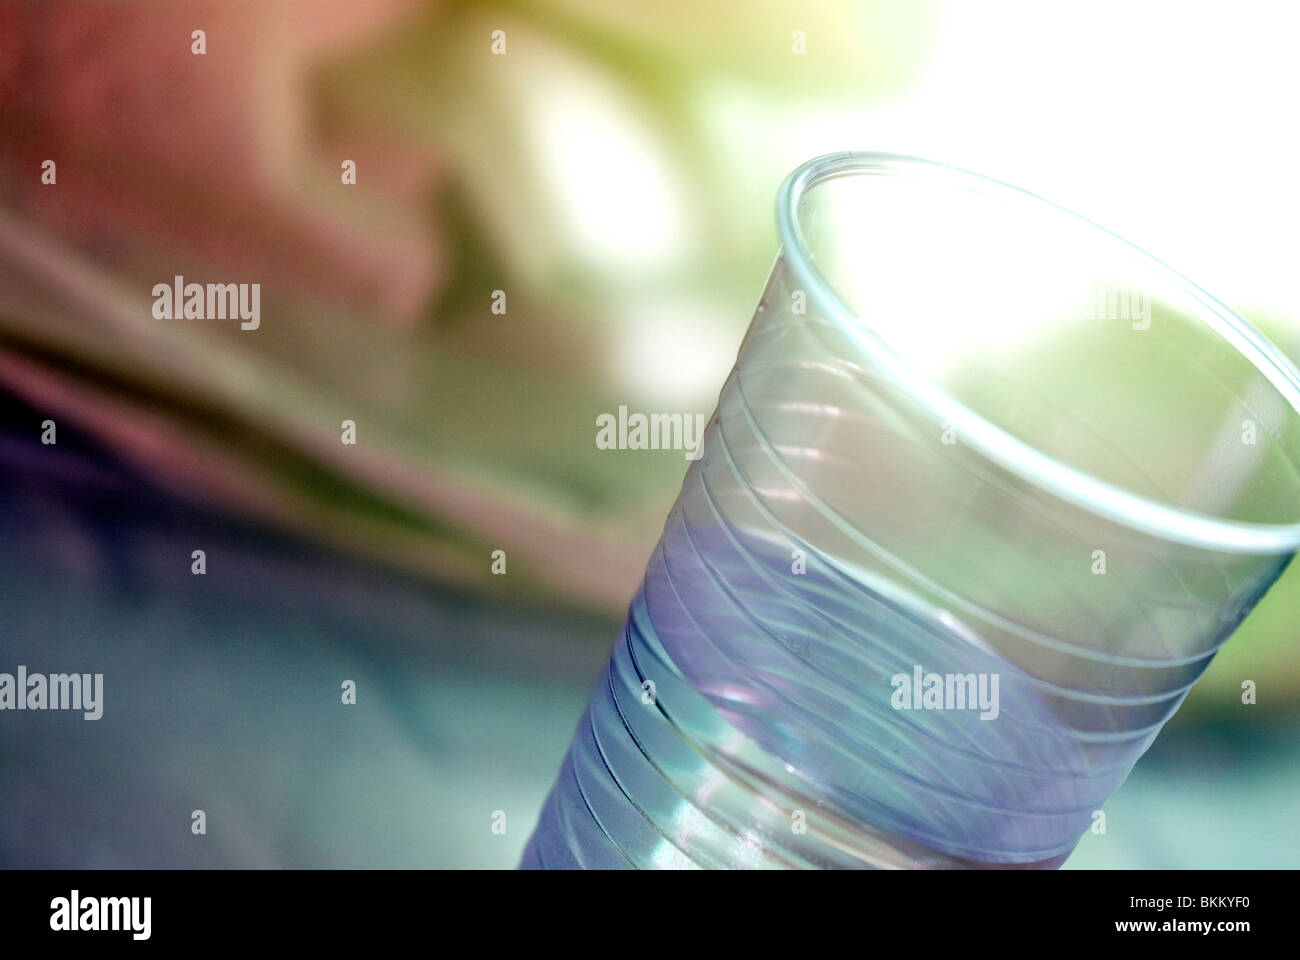 a plastic cup of water set against an abstract background Stock Photo